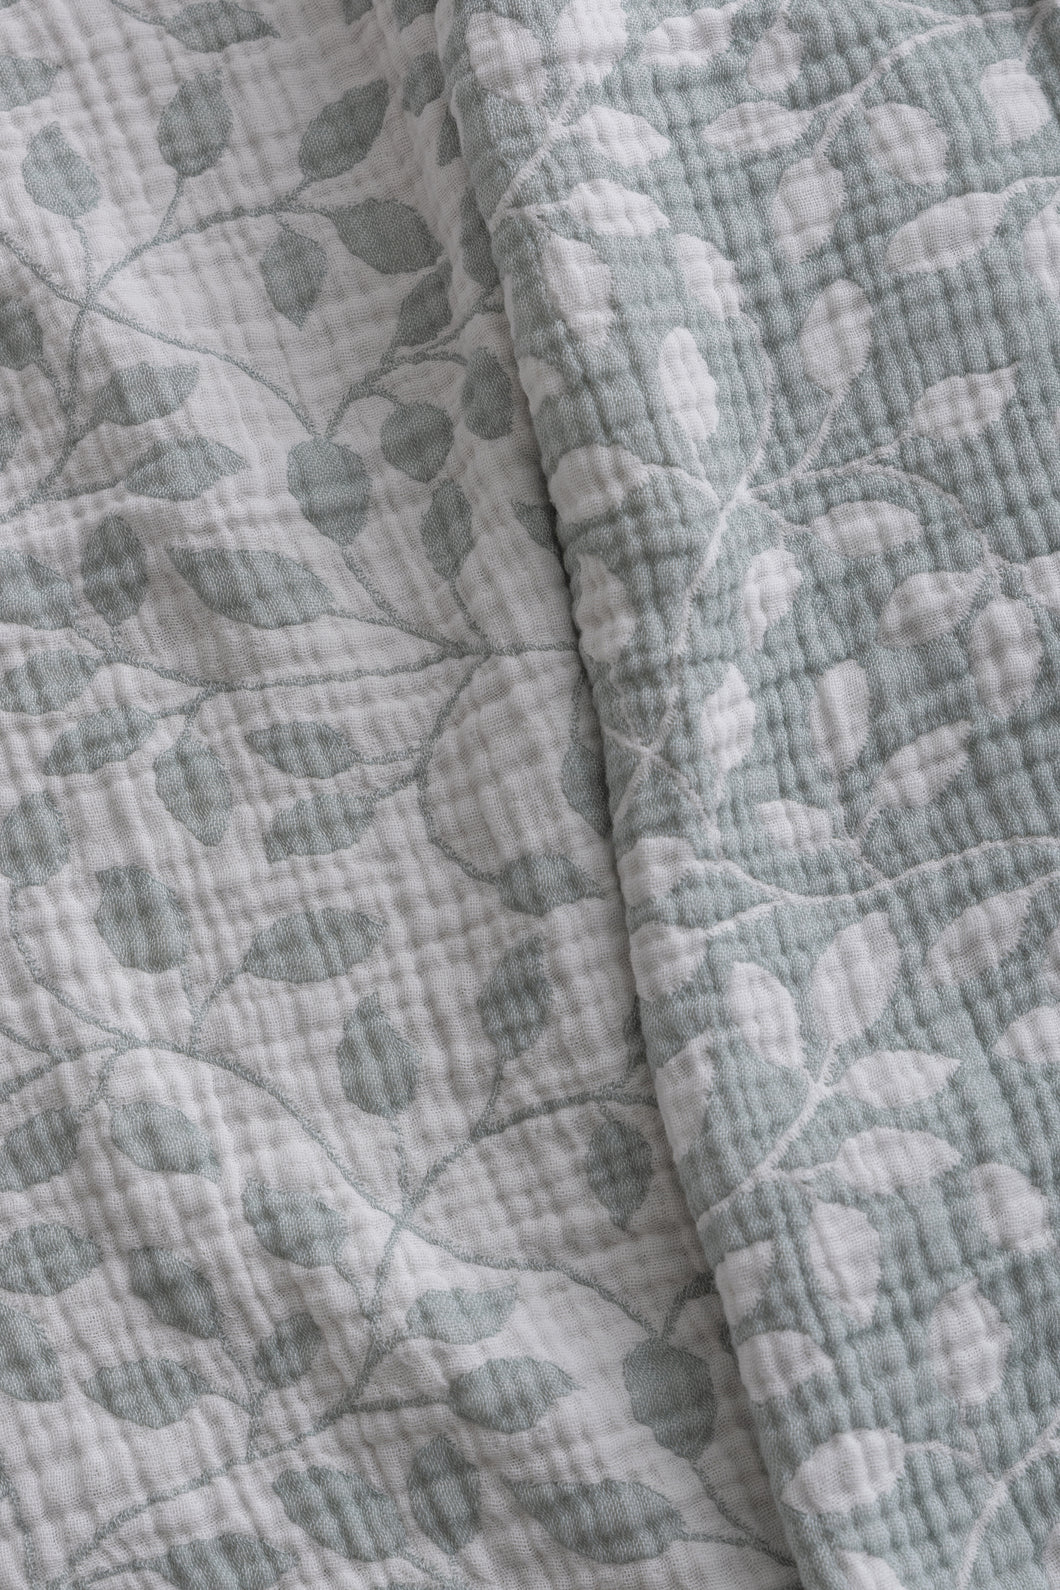 Olive 4 Layer Muslin Blanket in Mint